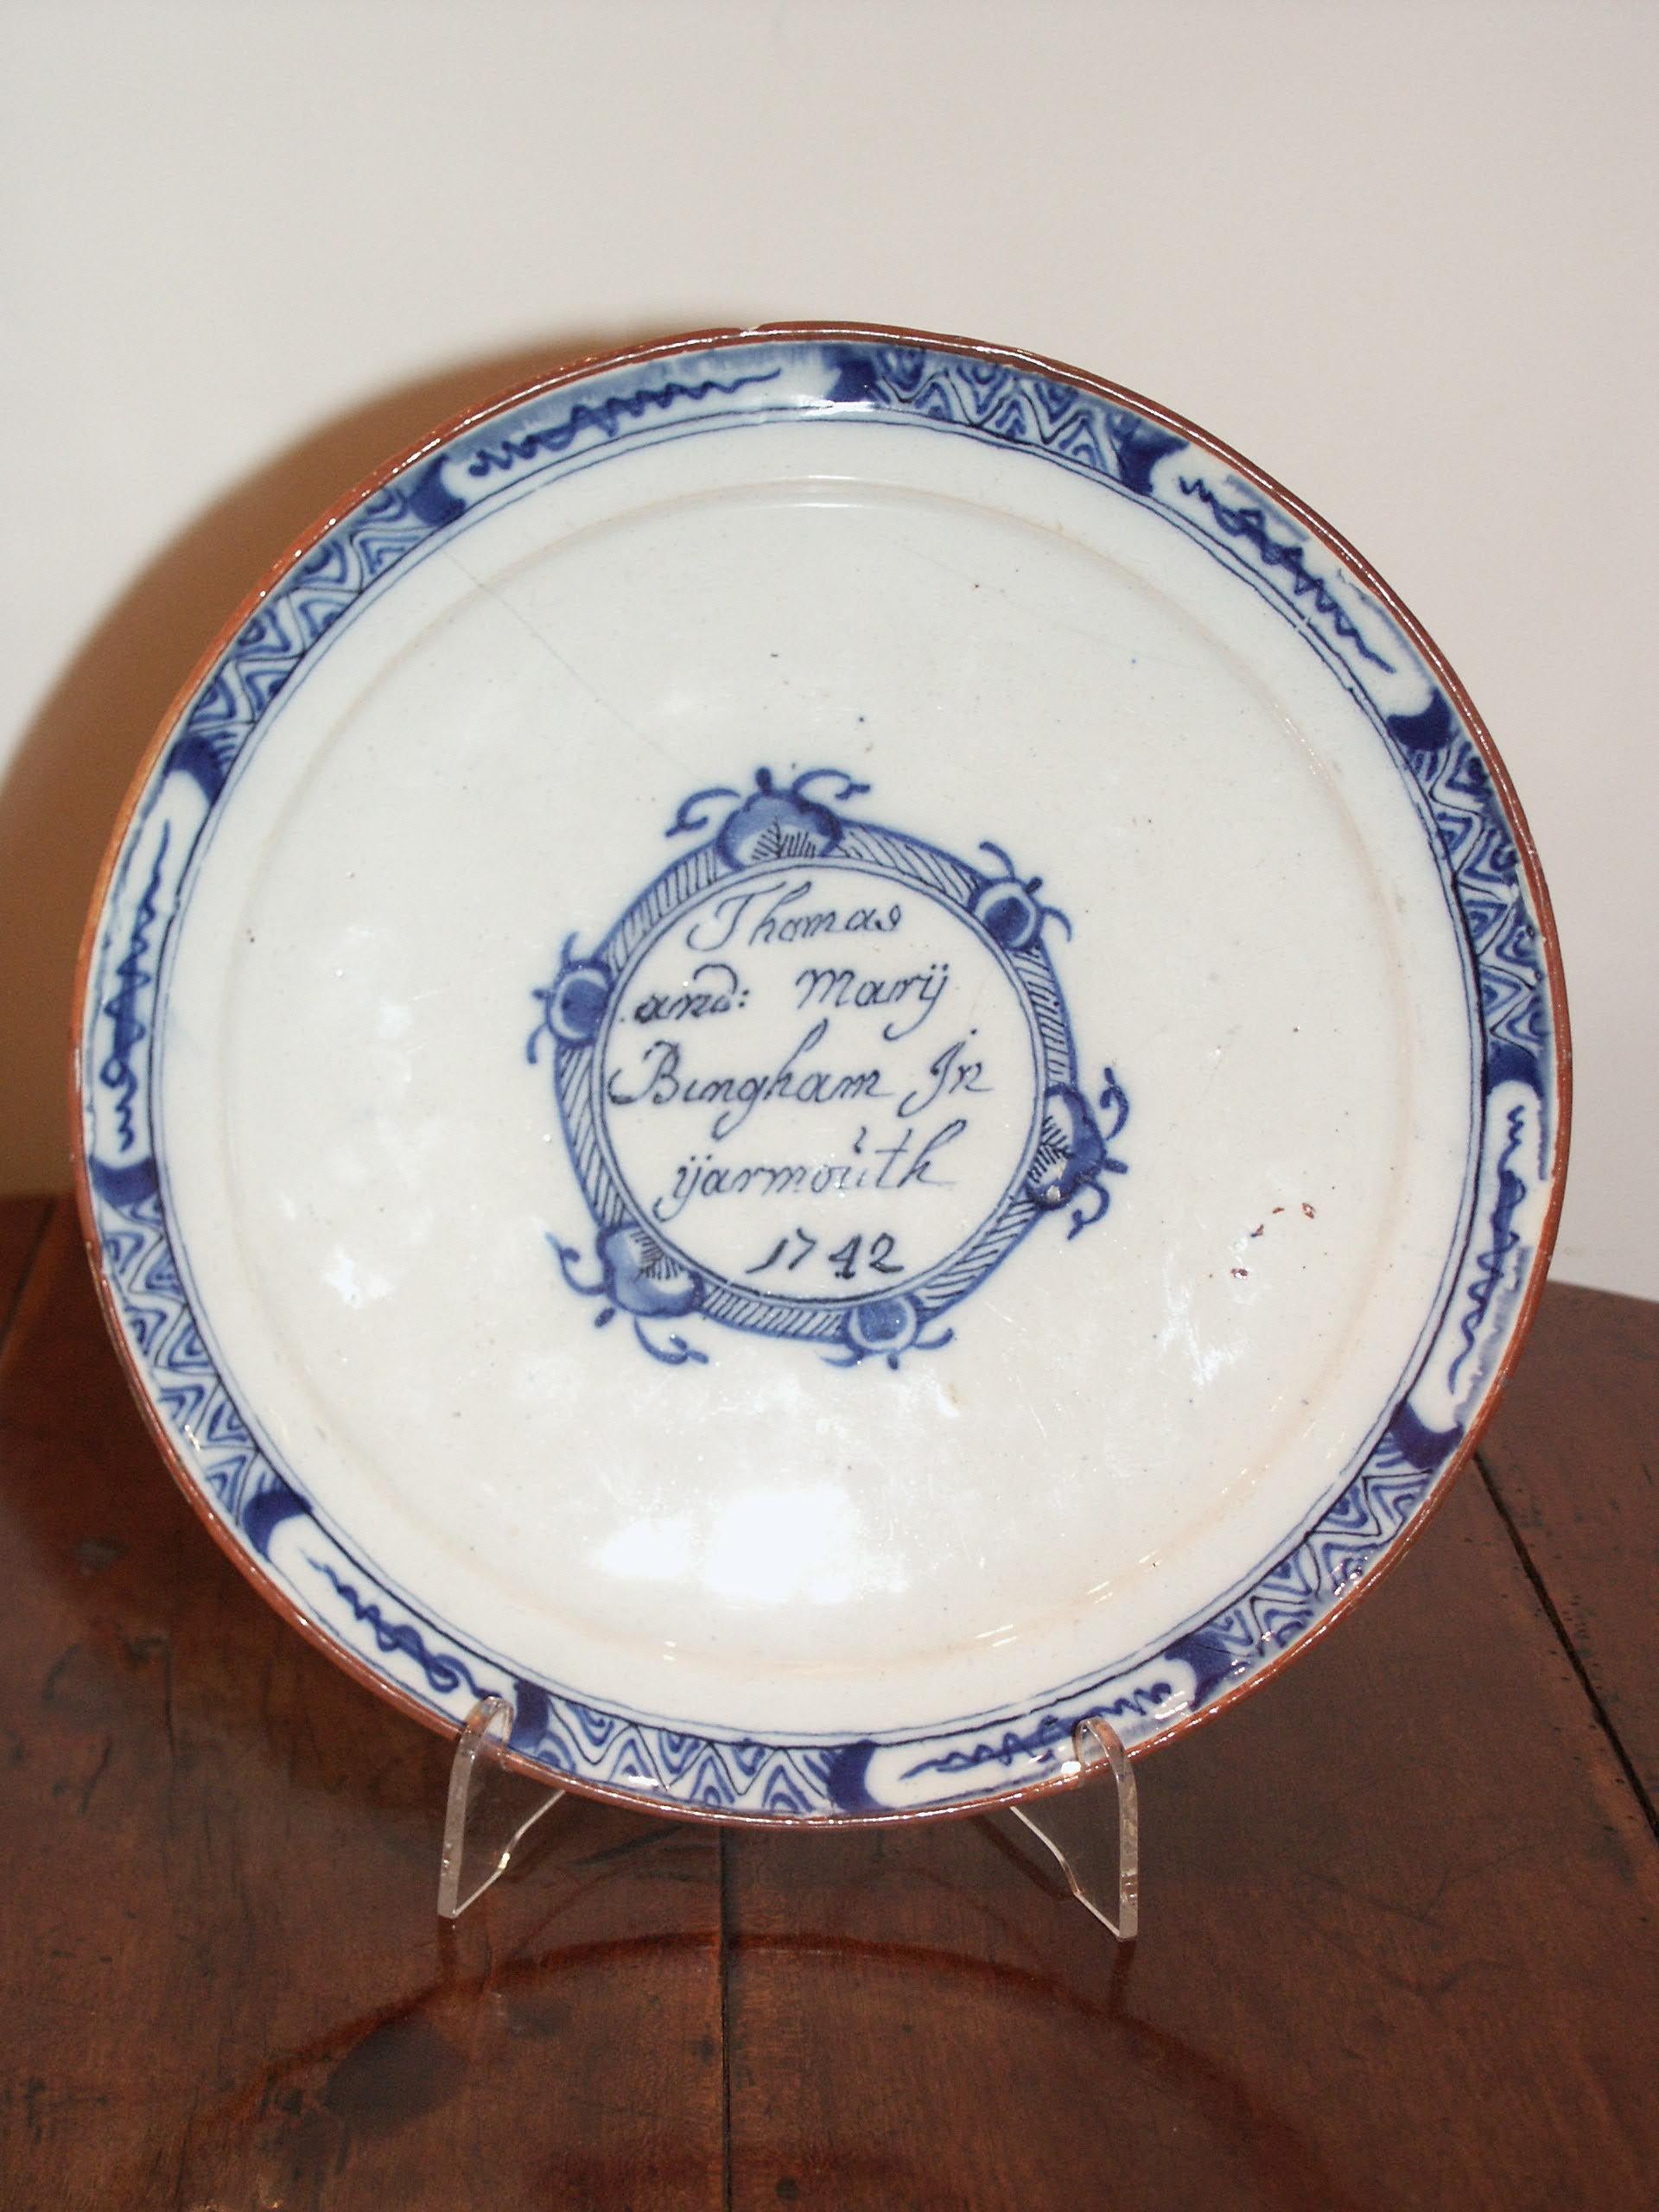 The inside centre decorated with the inscription, “Thomas and Mary Bingham In Yarmouth 1742”, inside a medallion. The rim decorated with six artemisia leaf reserves, with trellis borders interposed. The rim brown. Restoration to a rim glaze chip.